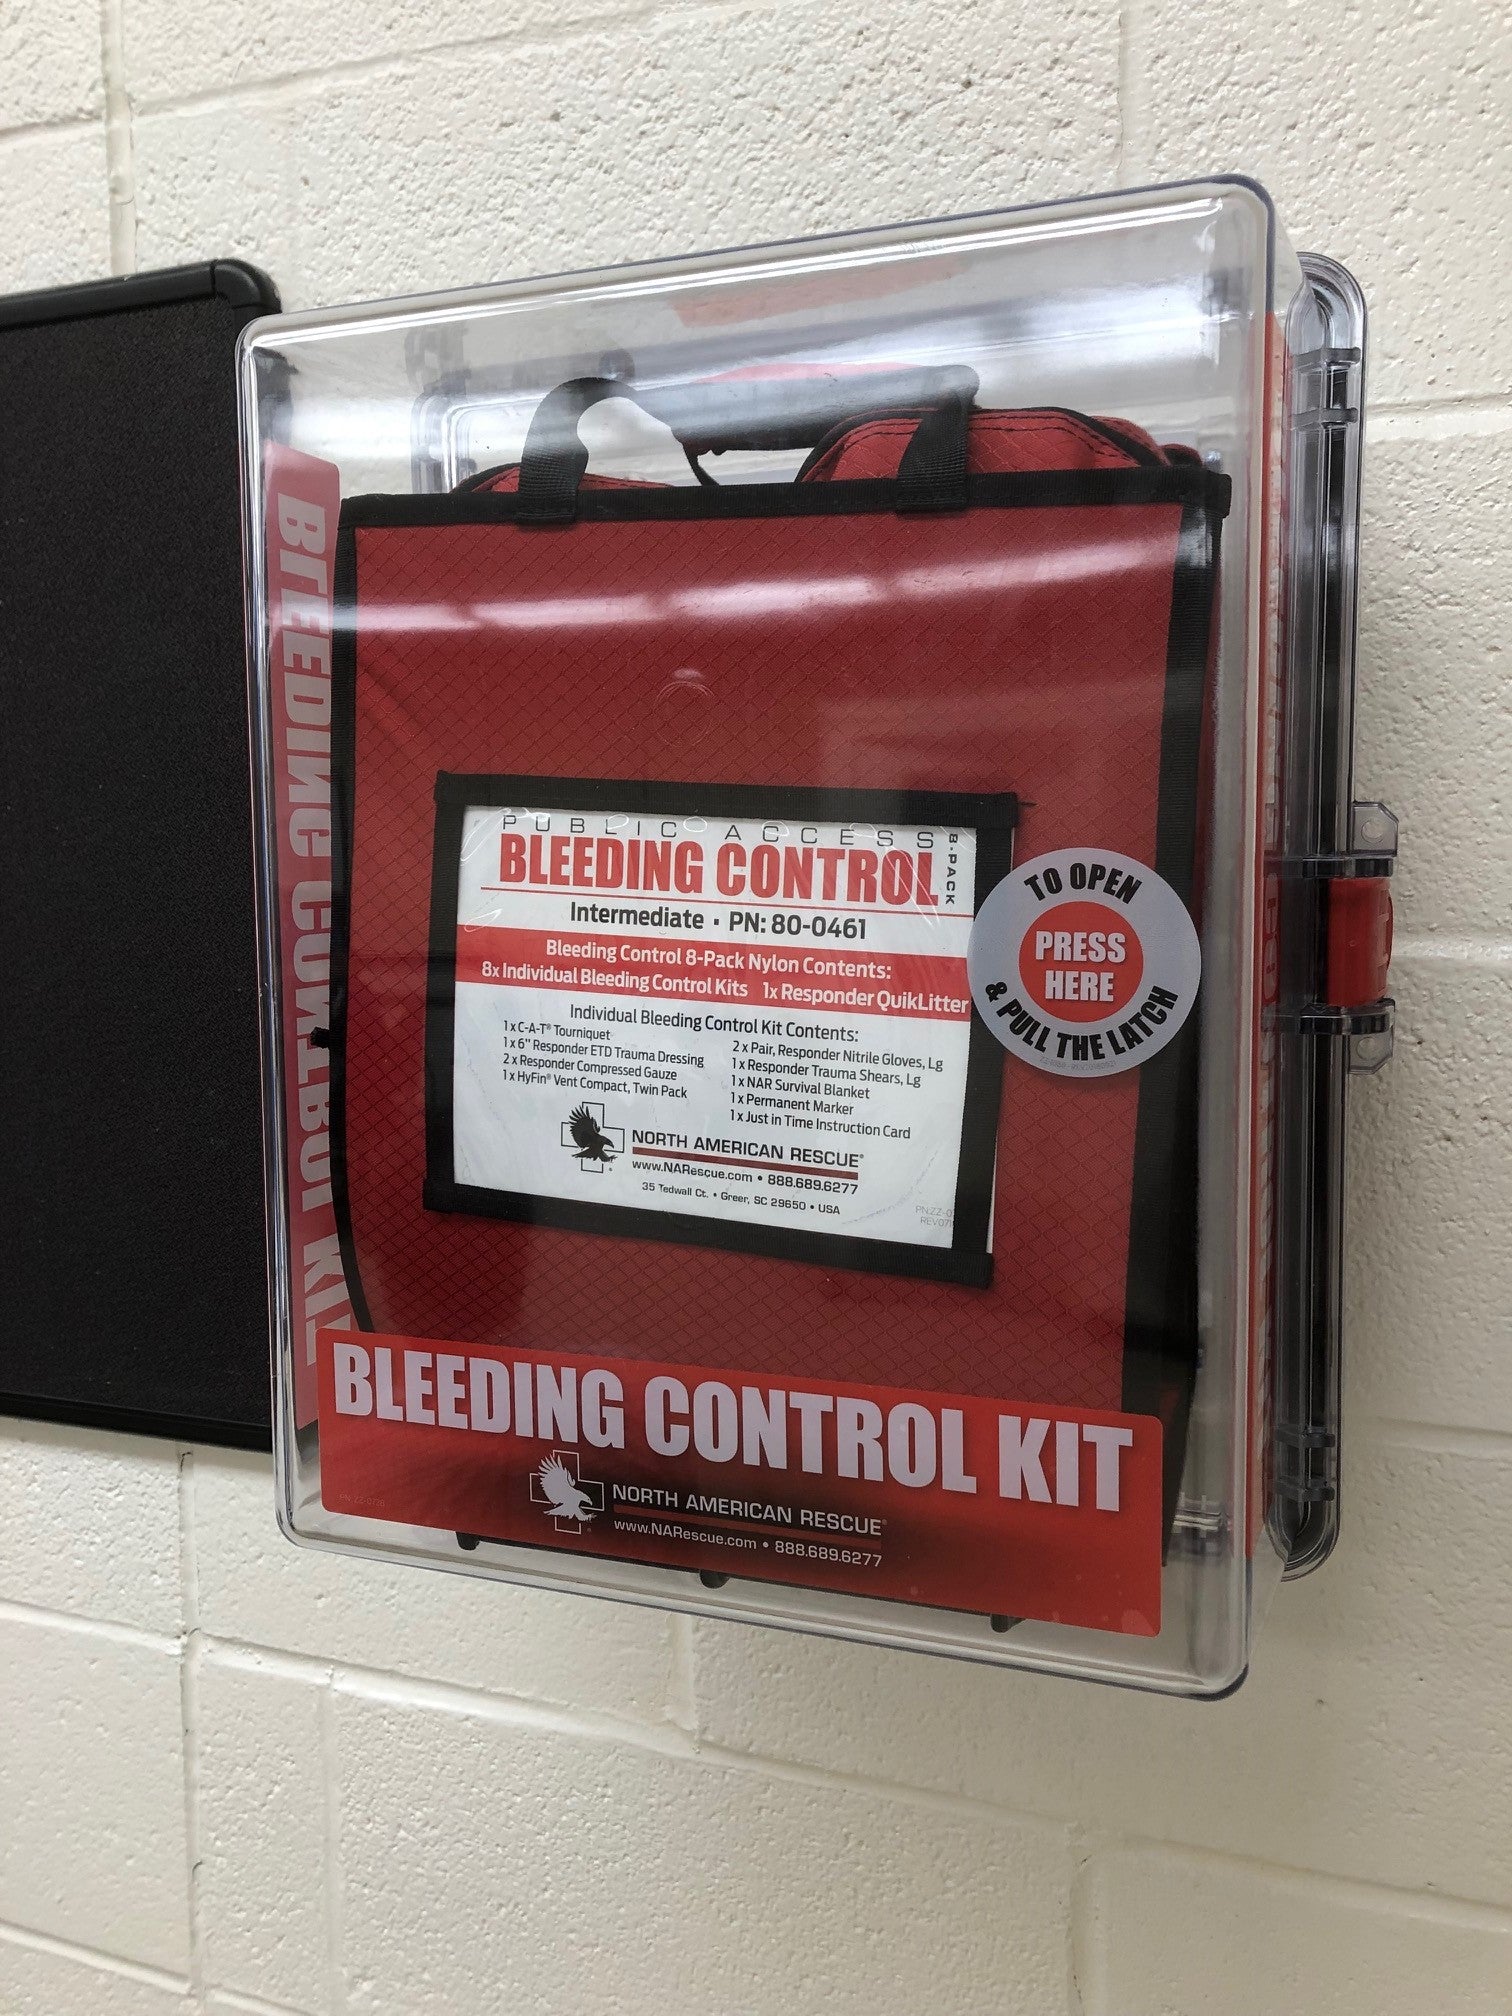 Bleeding Control Kits for schools, churches, and businesses